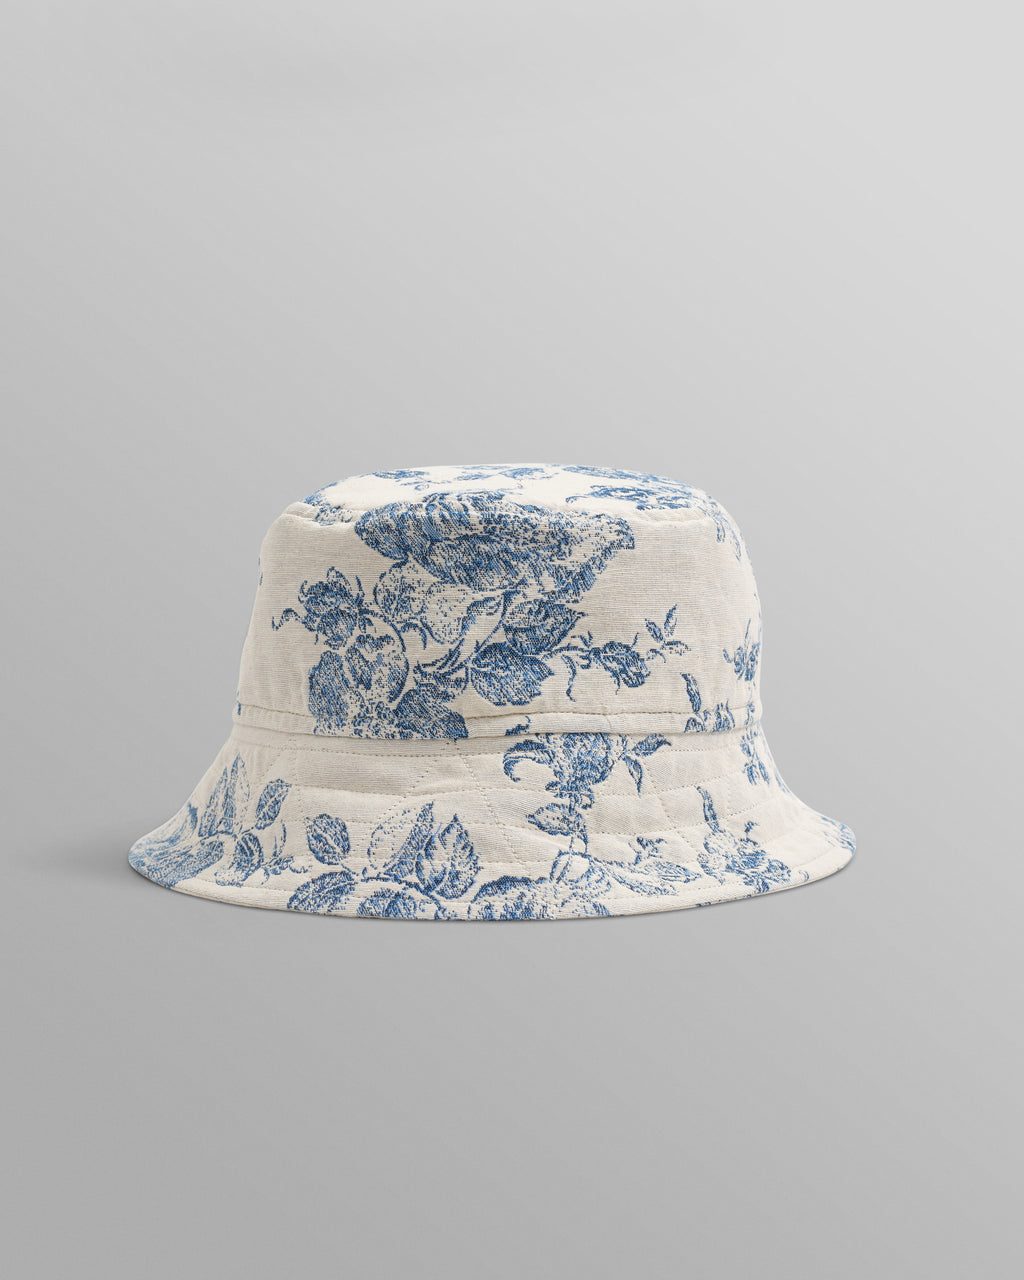 Maison Michel Paris - Charlotte, Bucket Hat in White And Blue Cotton Fabric With Printed Flowers.